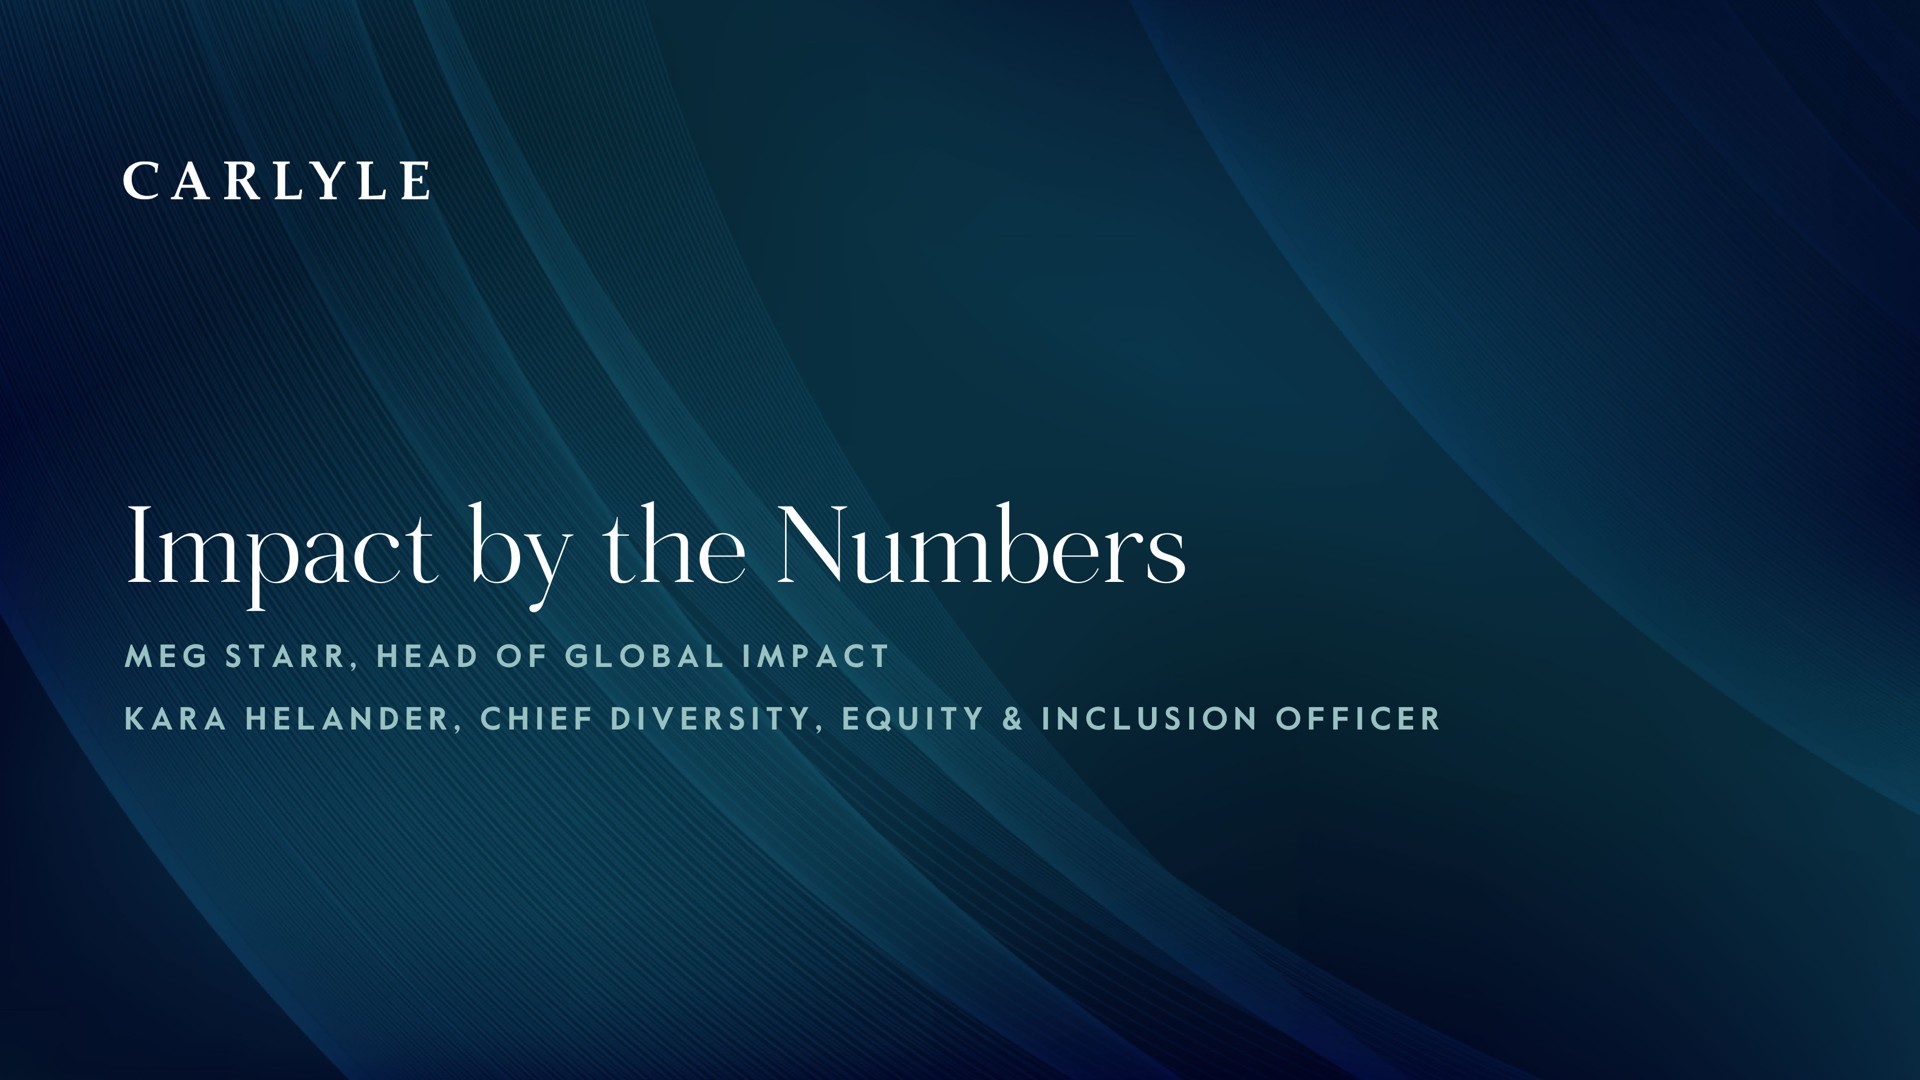 impact by the numbers | Carlyle